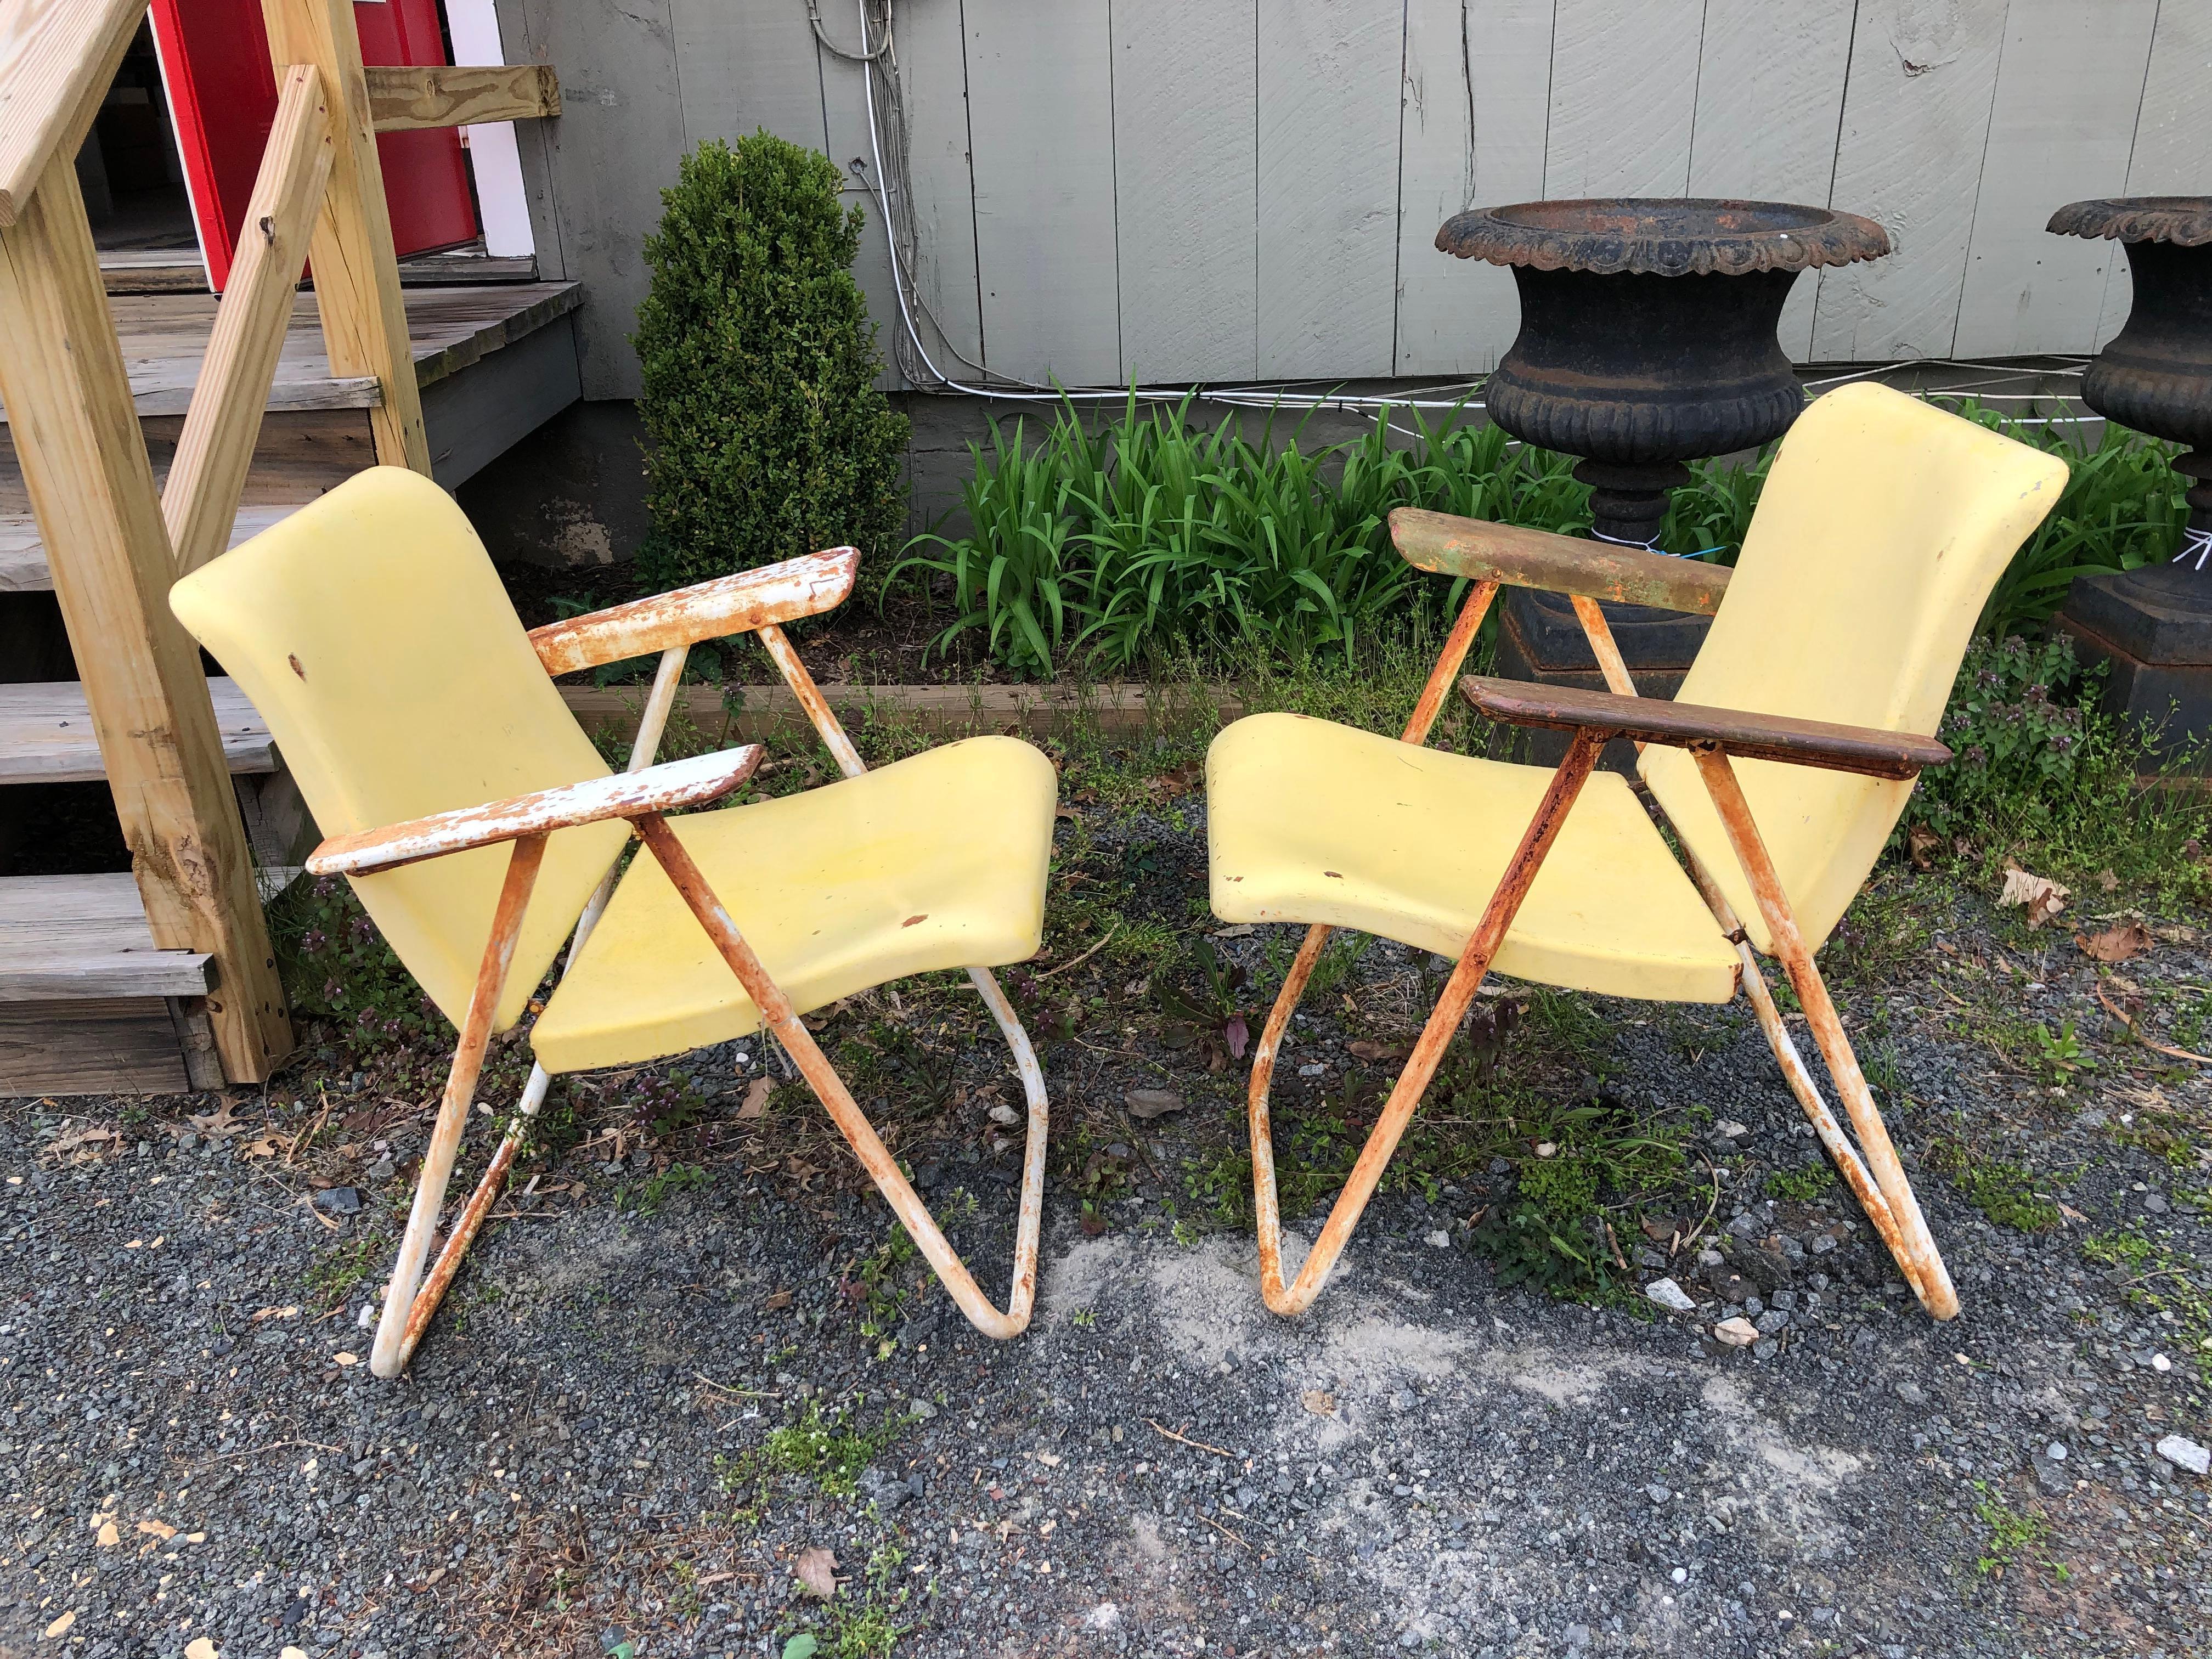 Super cool collector's metal industrial style chairs by Samson (labels on the back) in a fetching light yellow with naturally distressed arms.  Vestiges of green paint and rust add to the fabulous patina.  And they fold up!  These were used outside,